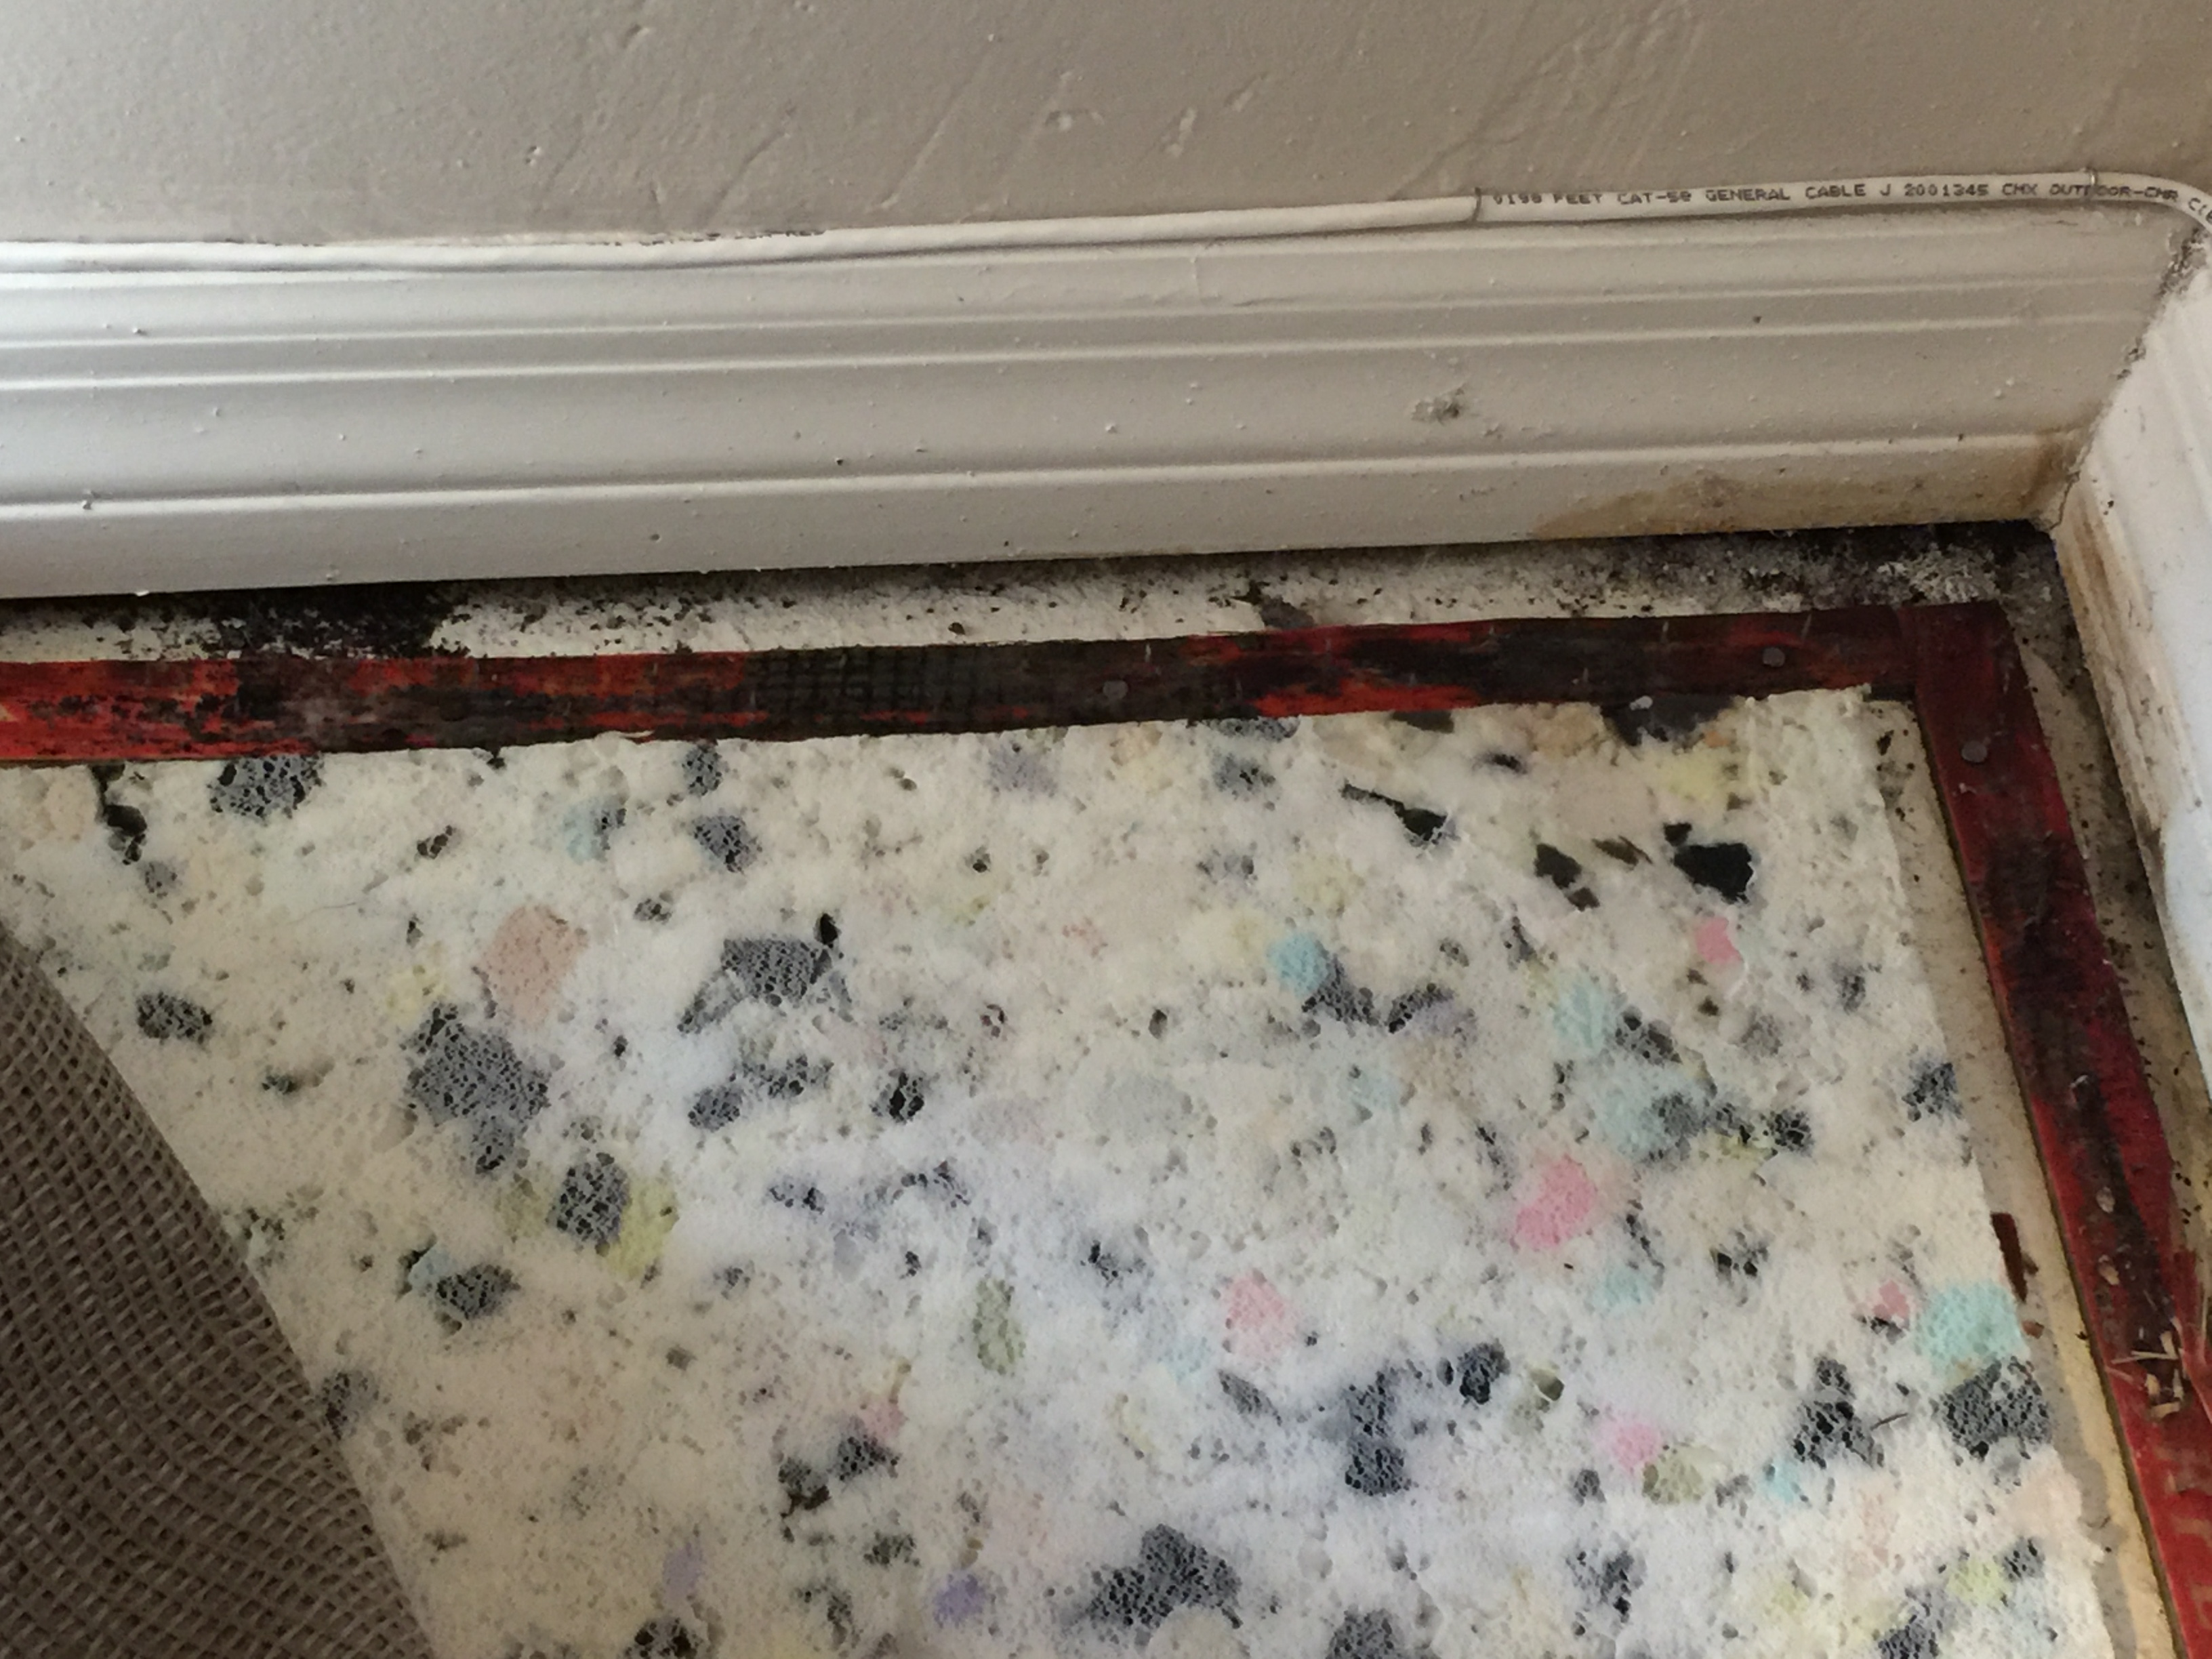 Wet floor from foundation that carpet wasn't cleaned properly.